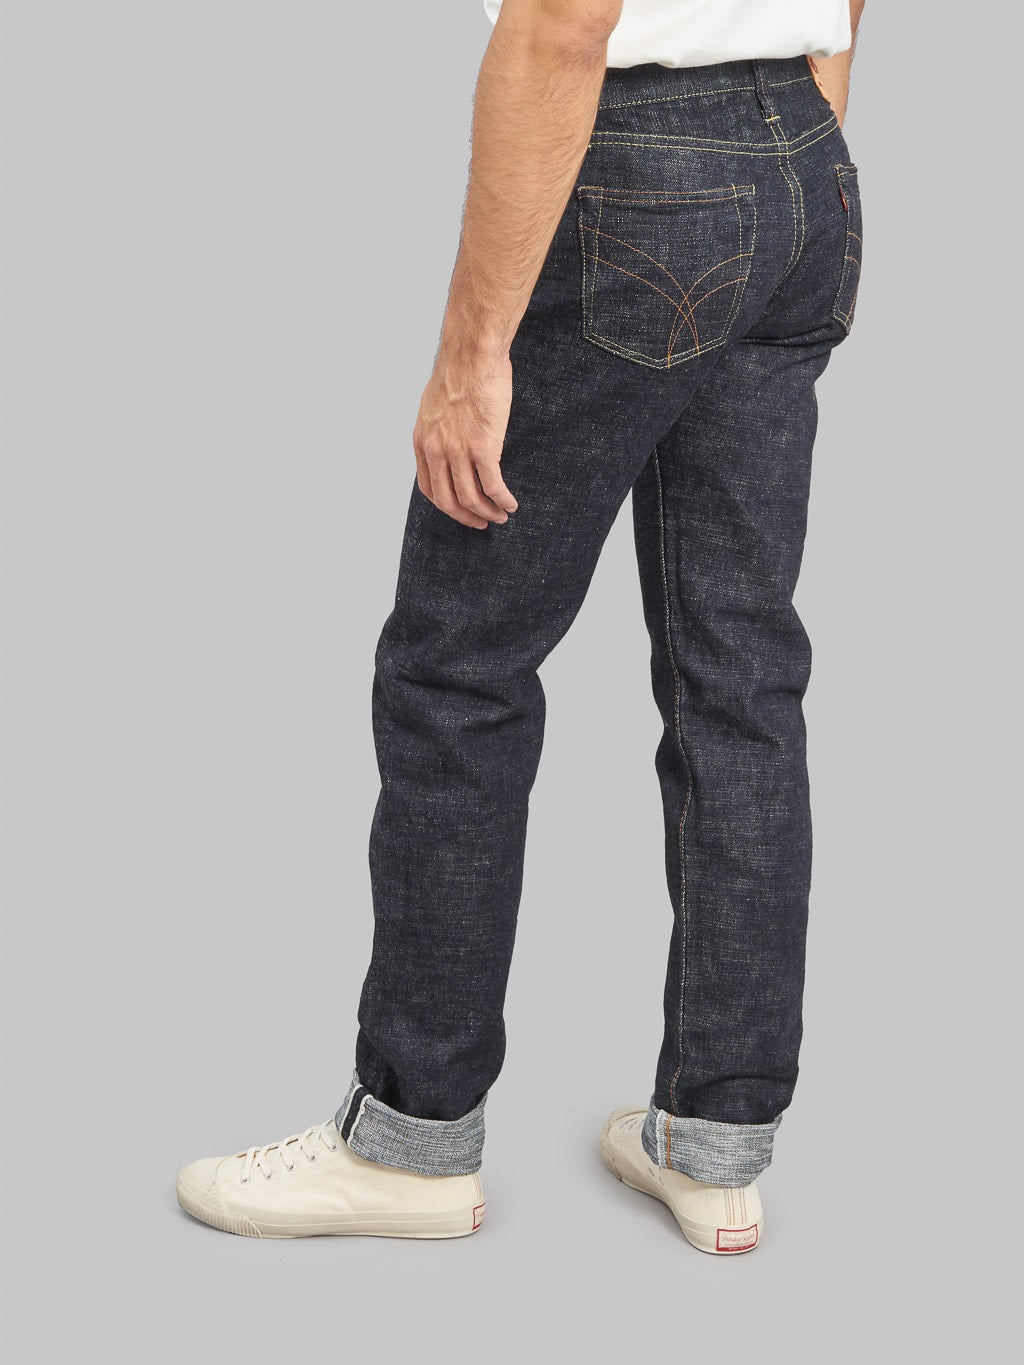 the strike gold 7104 ultra slubby straight tapered jeans  fitting